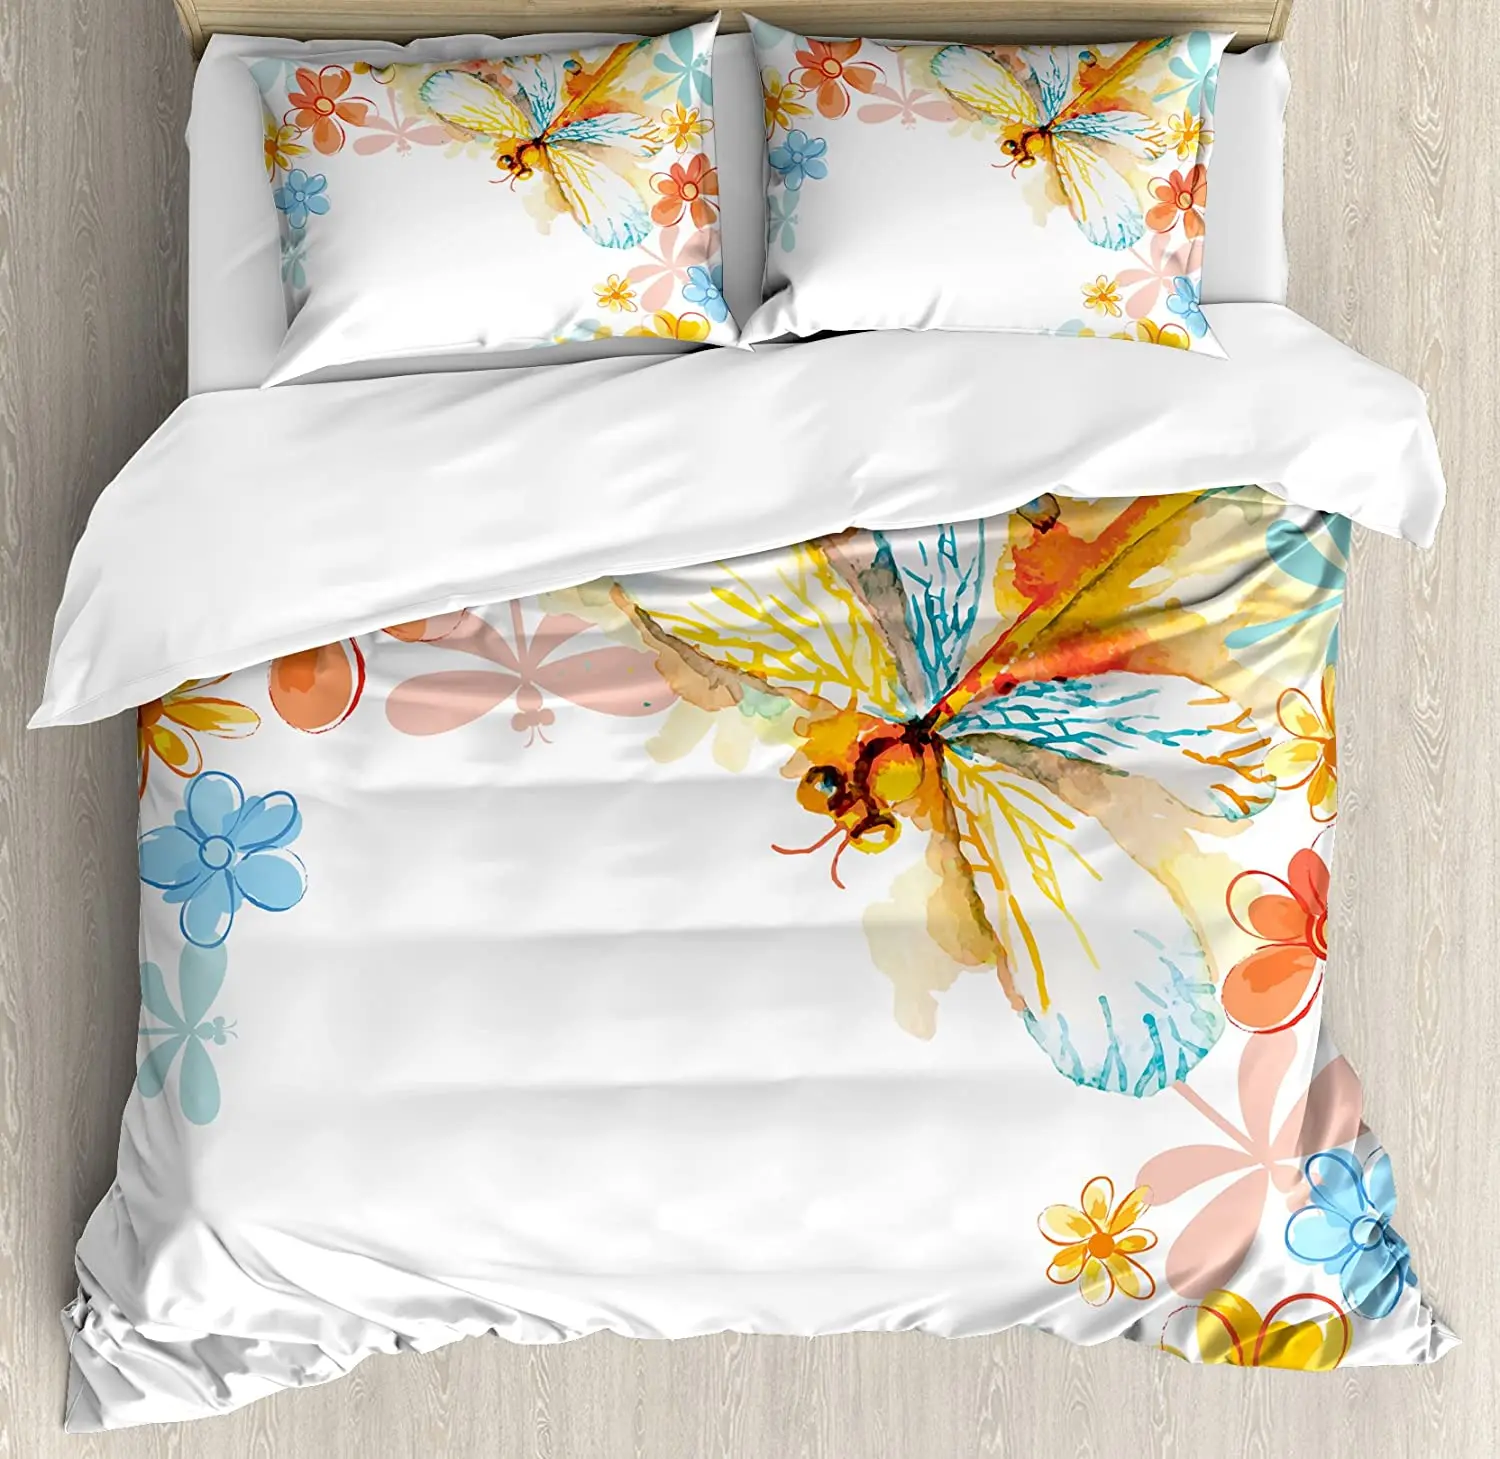 

Dragonfly Bedding Set For Bedroom Bed Home Abstract Grunge Vintage Design Moth with Sprin Duvet Cover Quilt Cover And Pillowcase